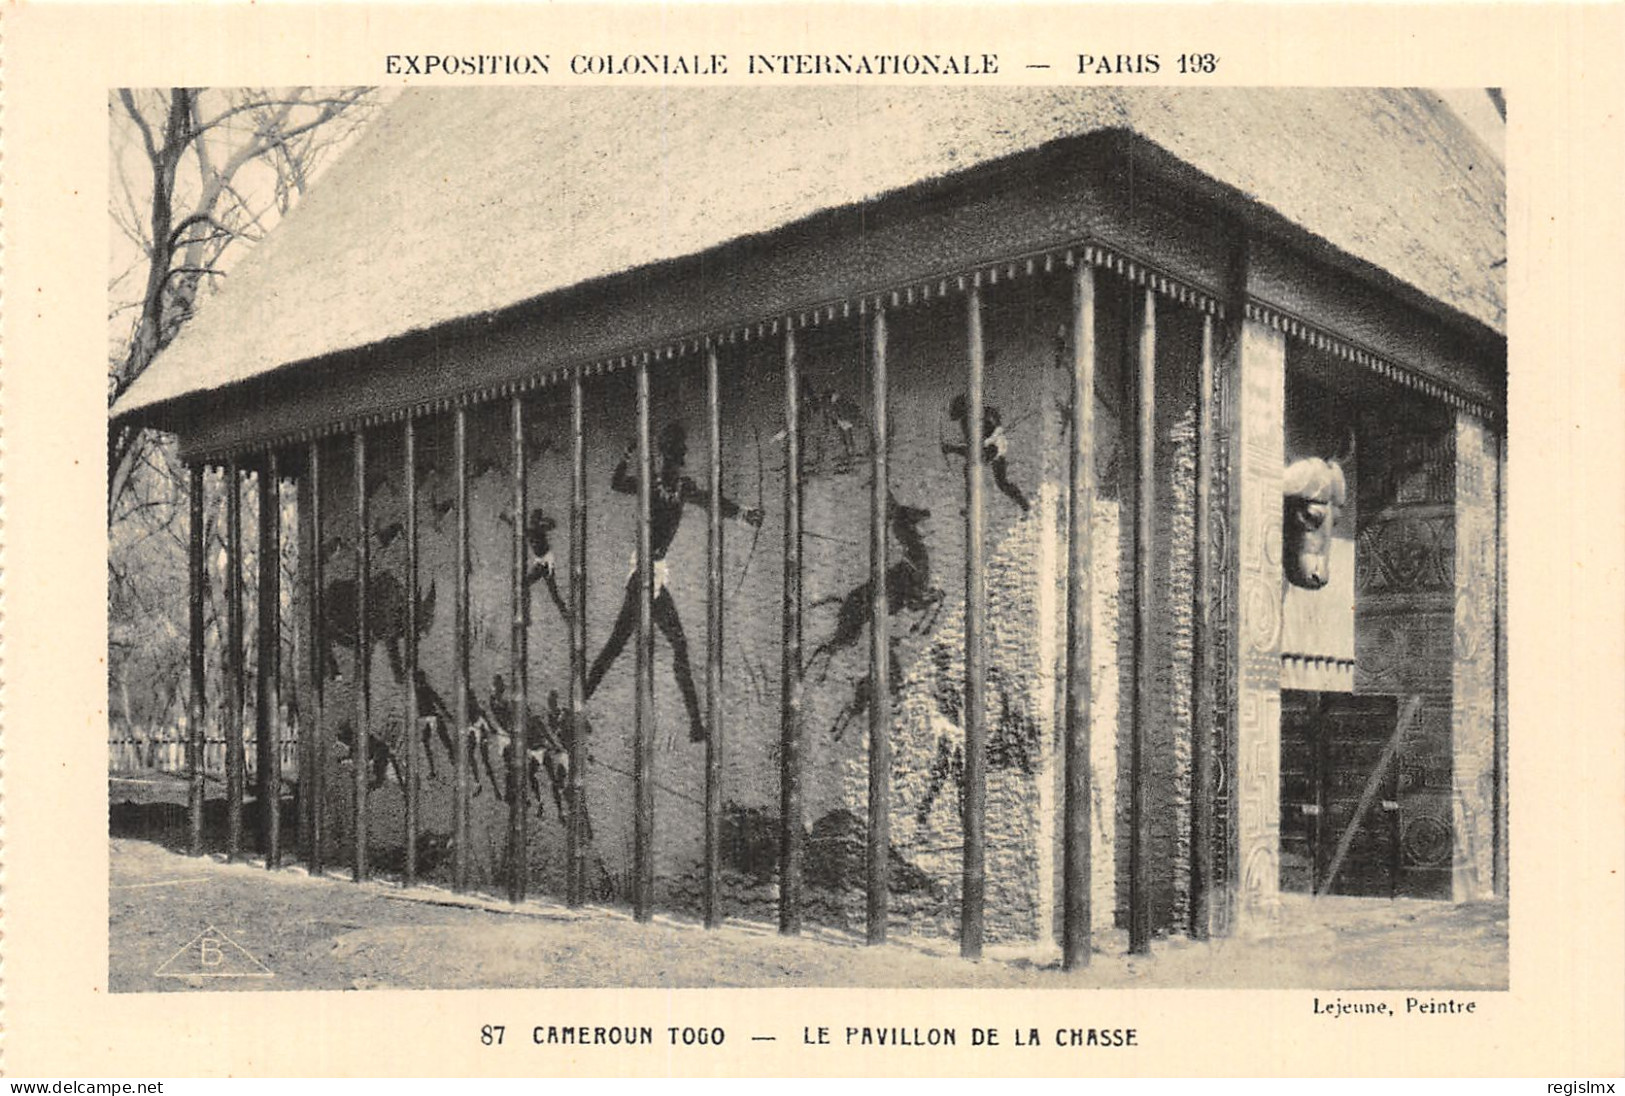 75-PARIS EXPOSTITION COLONIALE INTERNATIONALE 1931 CAMEROUN TOGO-N°T1054-H/0203 - Expositions